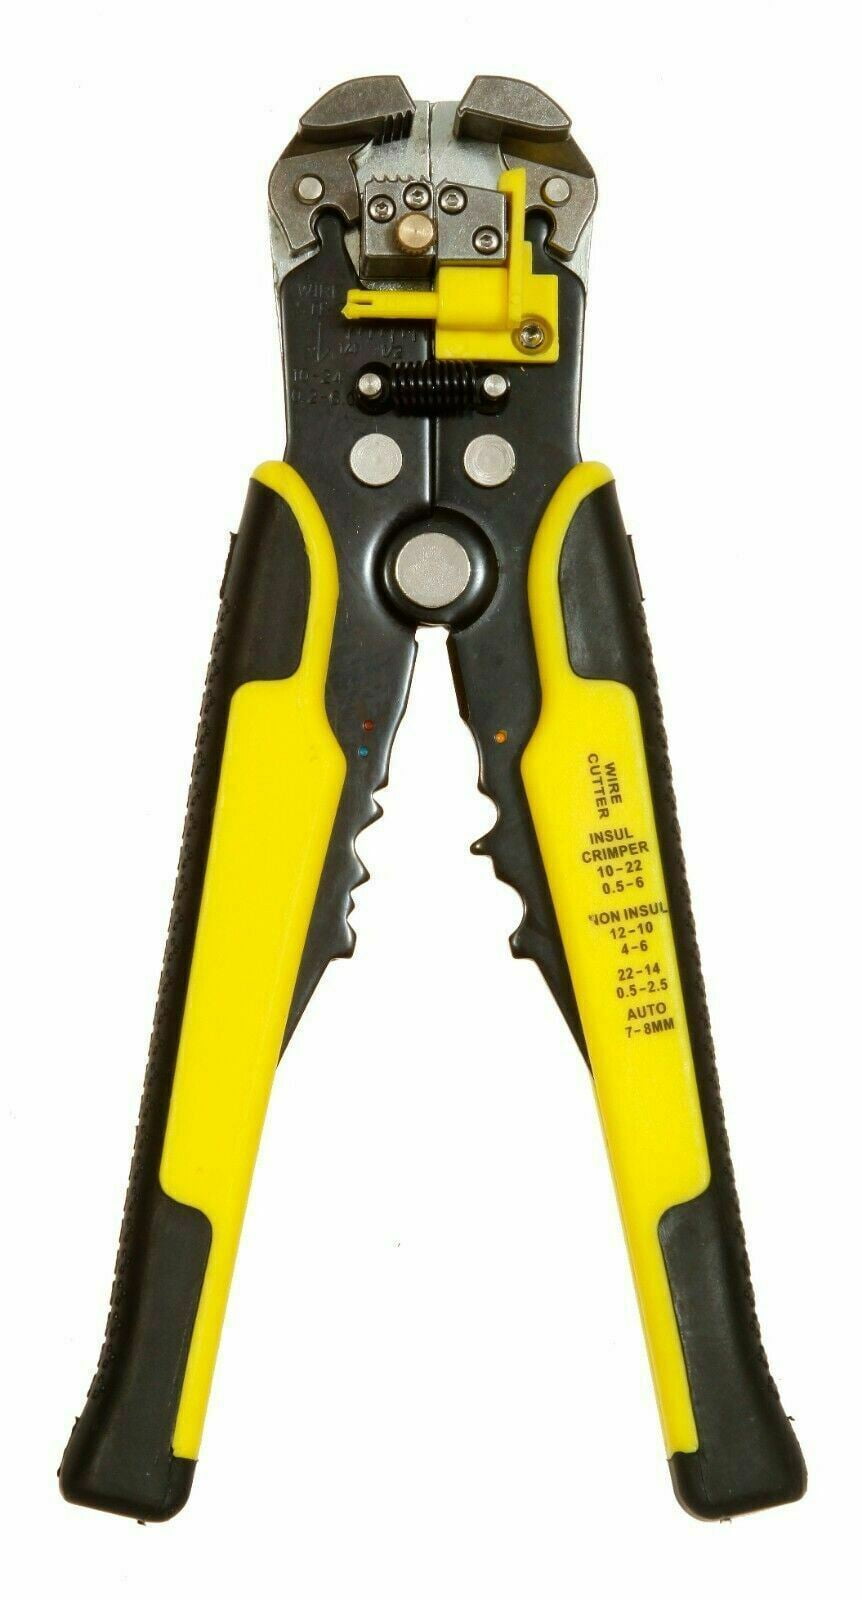 Automatic Wire Stripers Adjustable Wirestripper Pliers Cutter New Hot Work Tool 